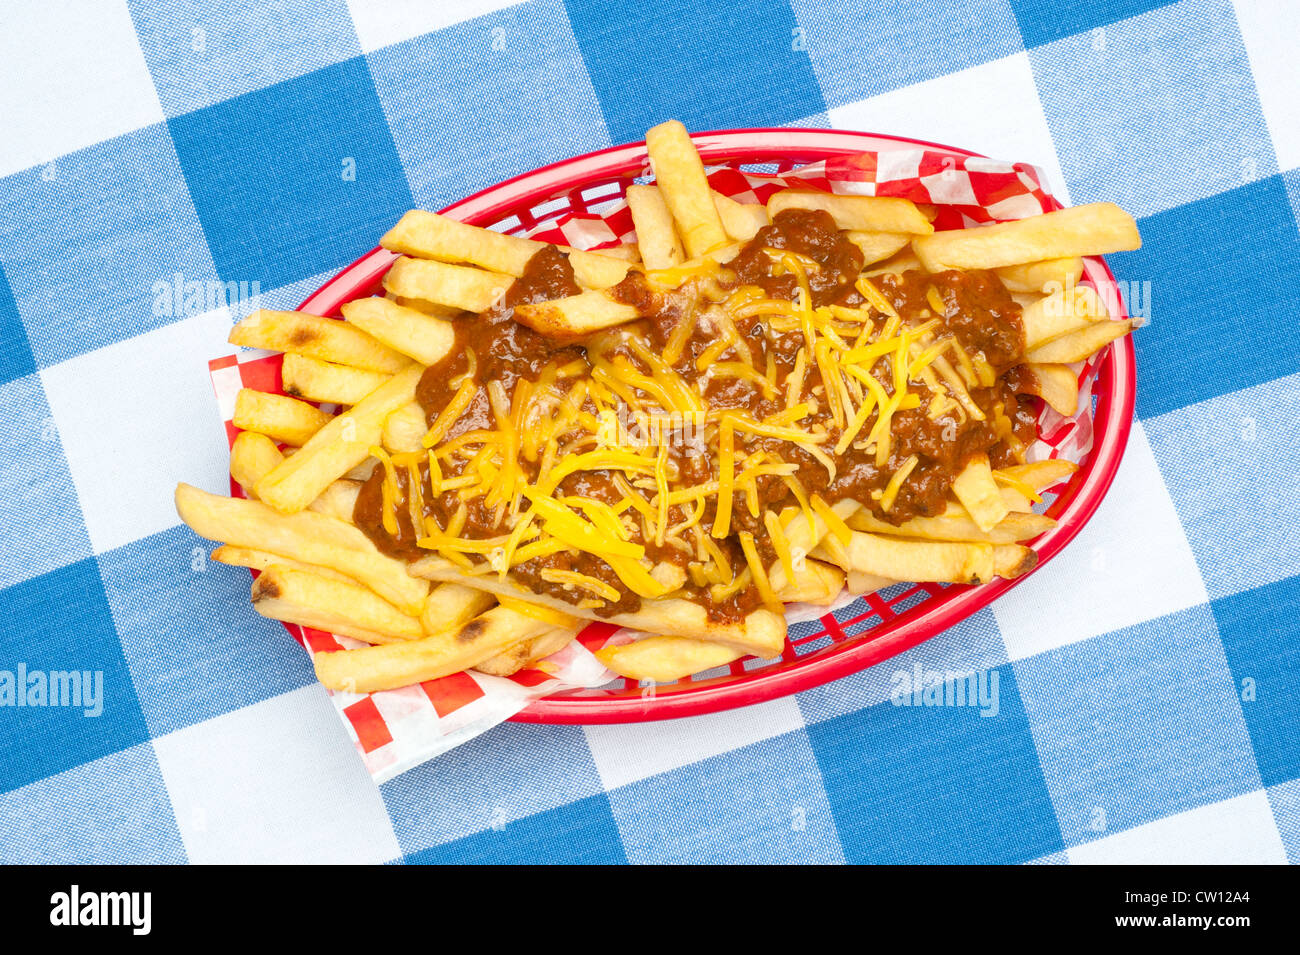 A basket of chili cheese fries covered in hot chili and melted cheddar cheese. Stock Photo